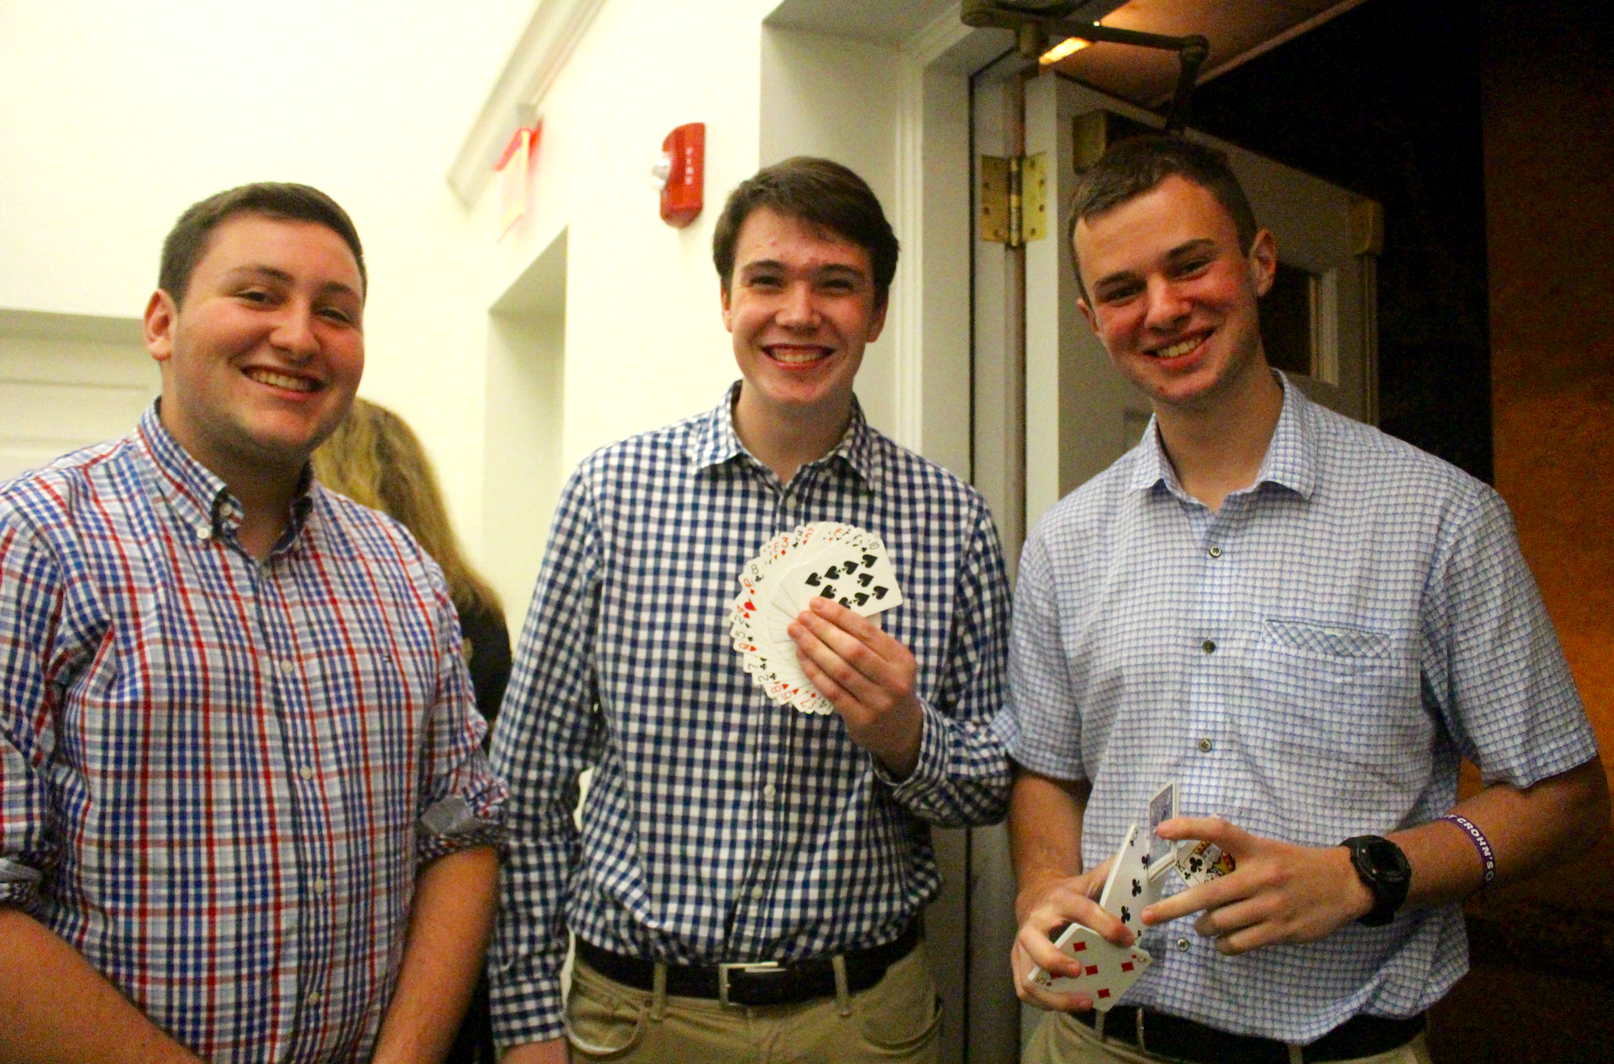 Ben Langley and his magic club friends from Bucknell at the Cocktails & Comedy fundraiser for The Undies Project. 